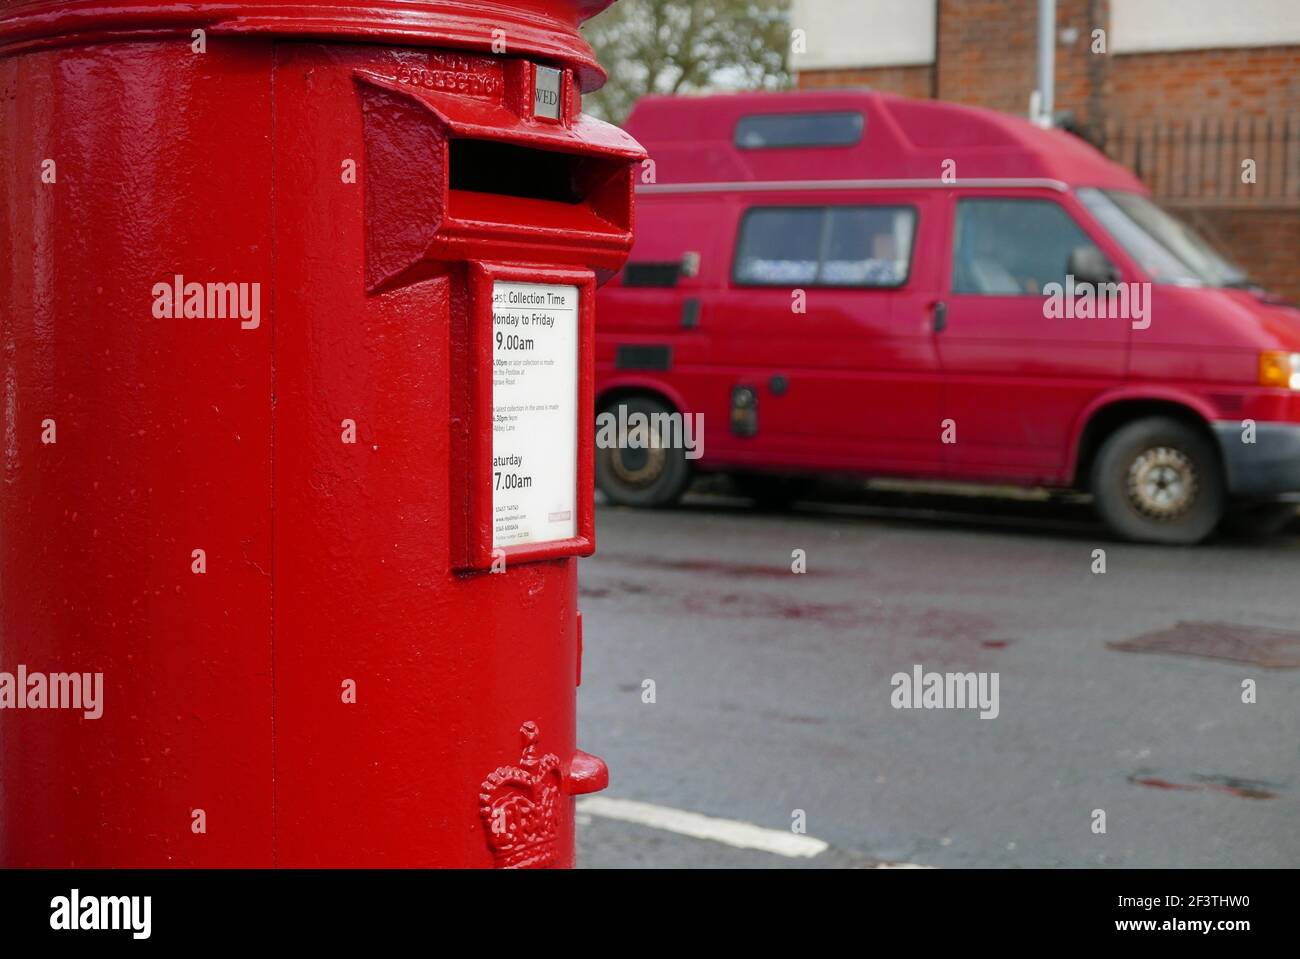 Red Letter box and red van Stock Photo